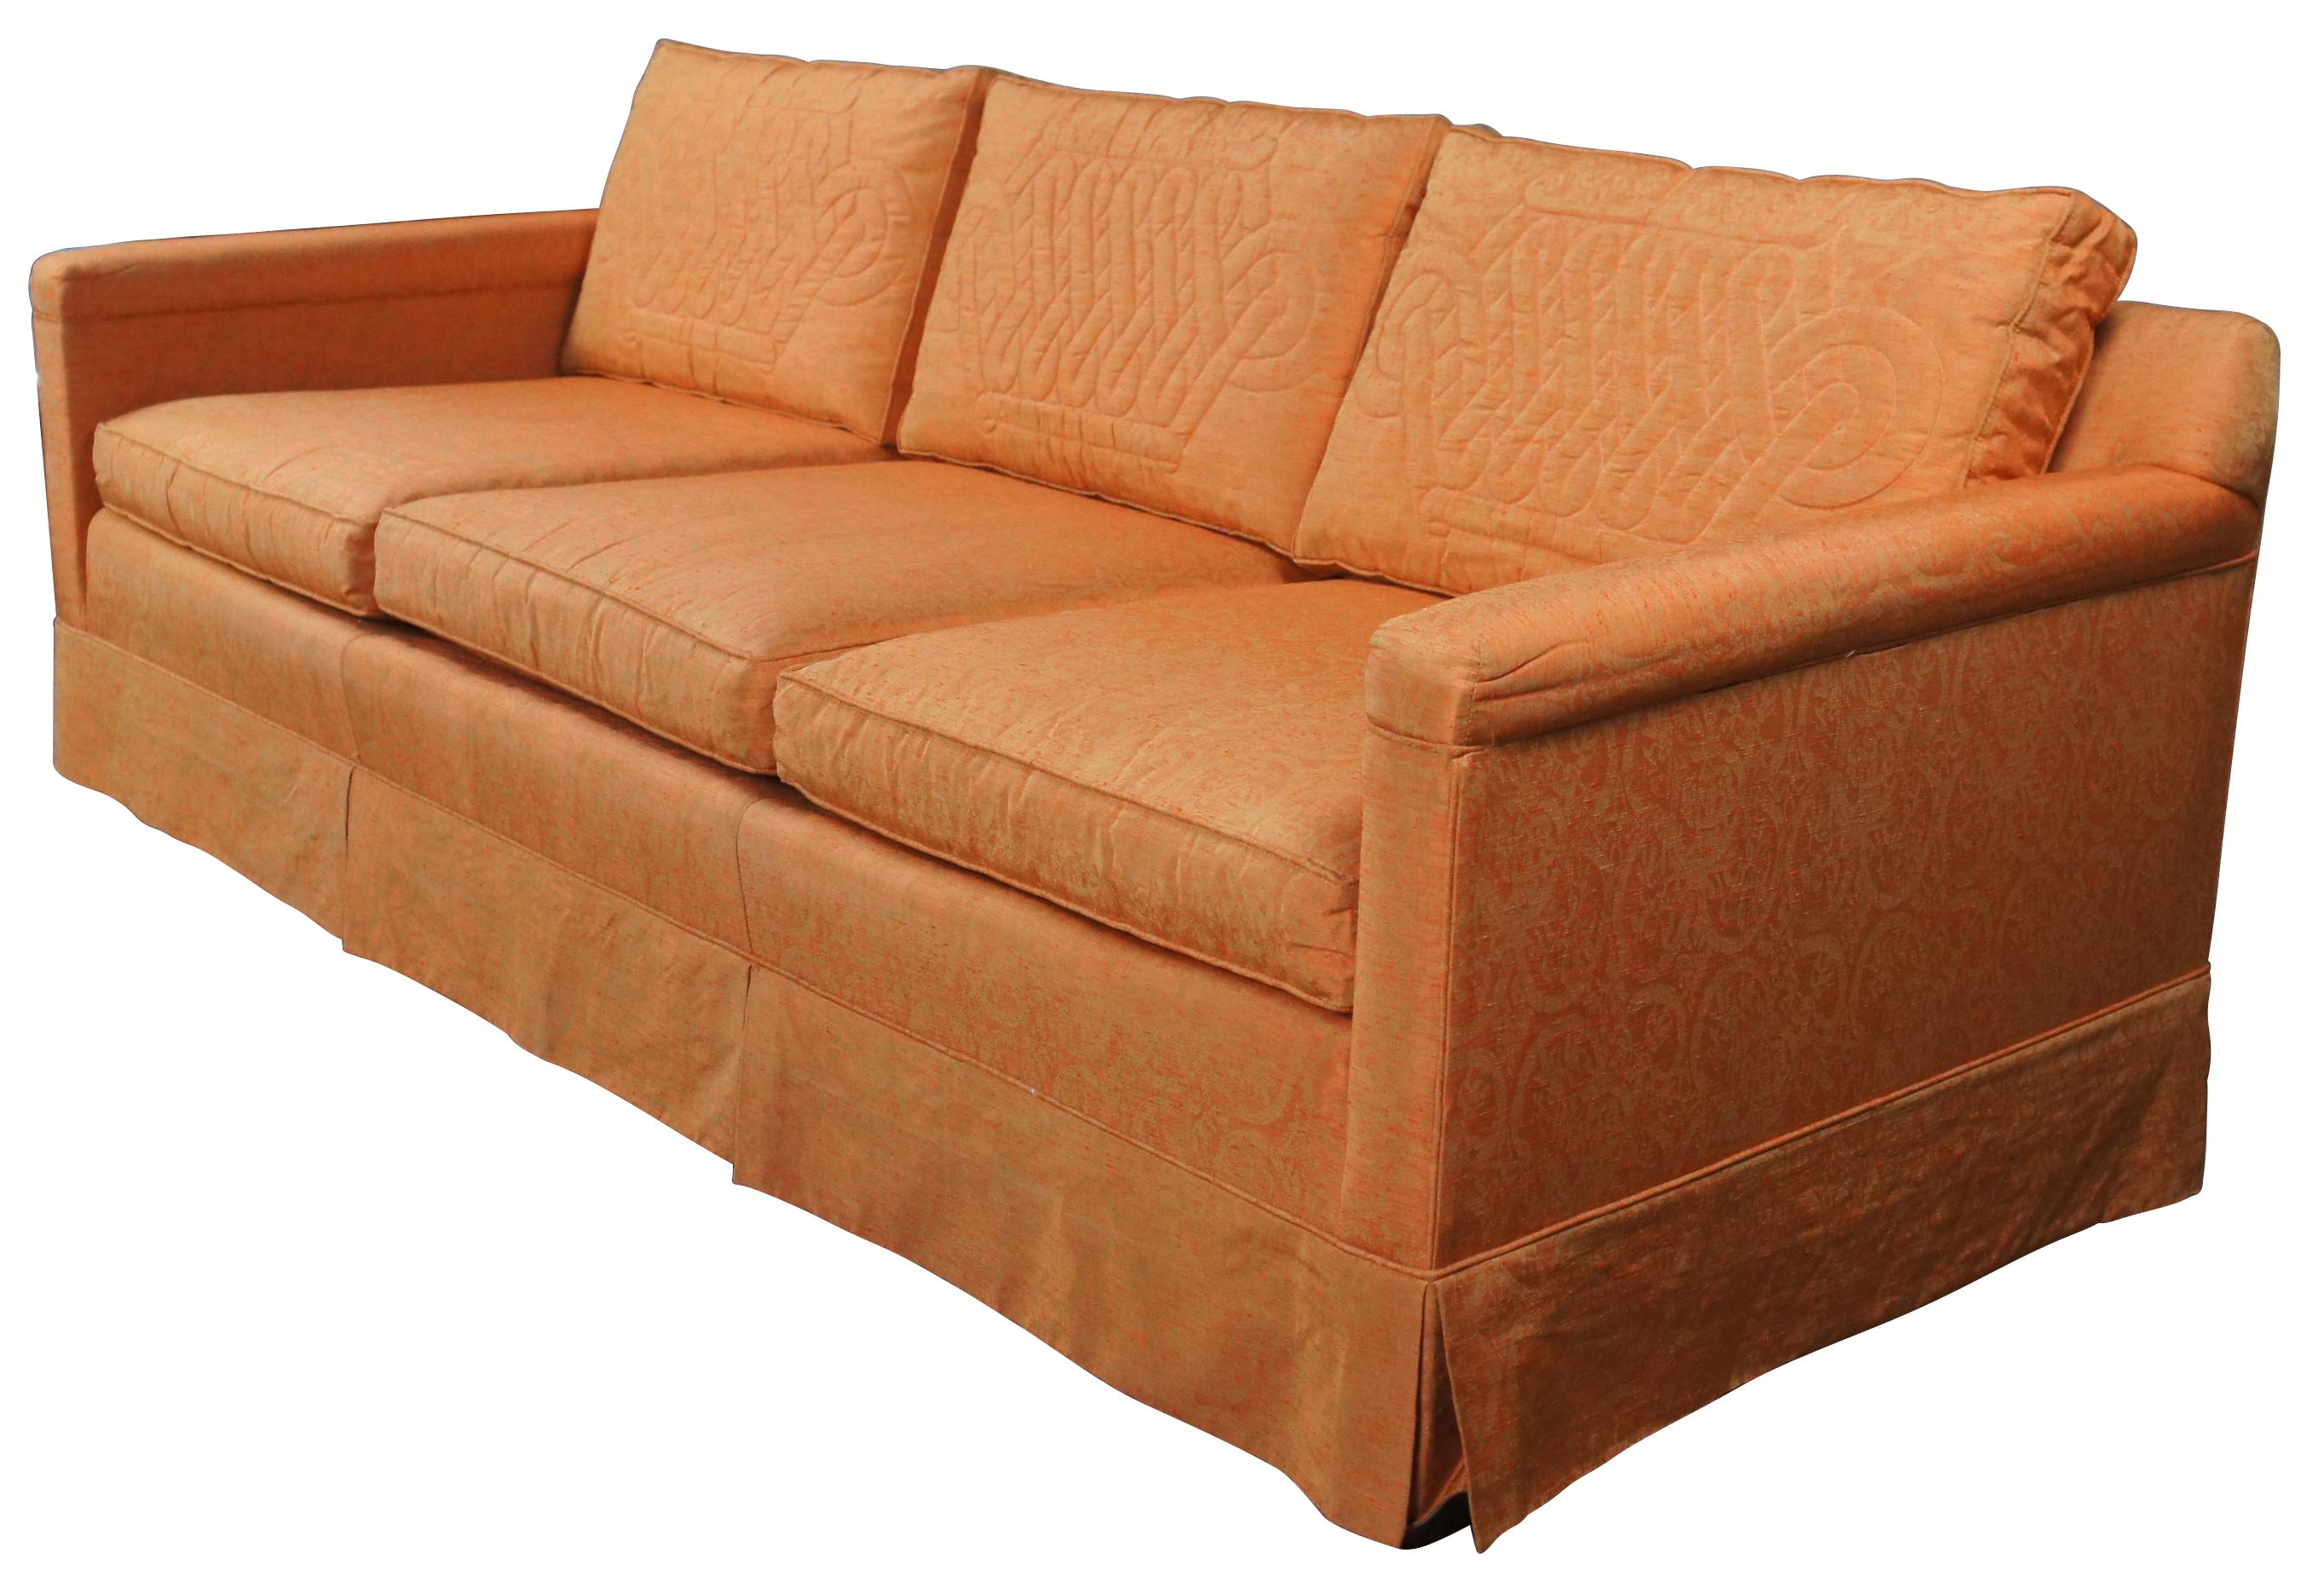 An eye catching mid century 3 seater sofa by Globe Furniture, c.1962. Features a rectangular form upholstered in an orange damask style fabric with quilted medallion back pillows. The sofa is supported by square tapered legs with a mahogany finish.